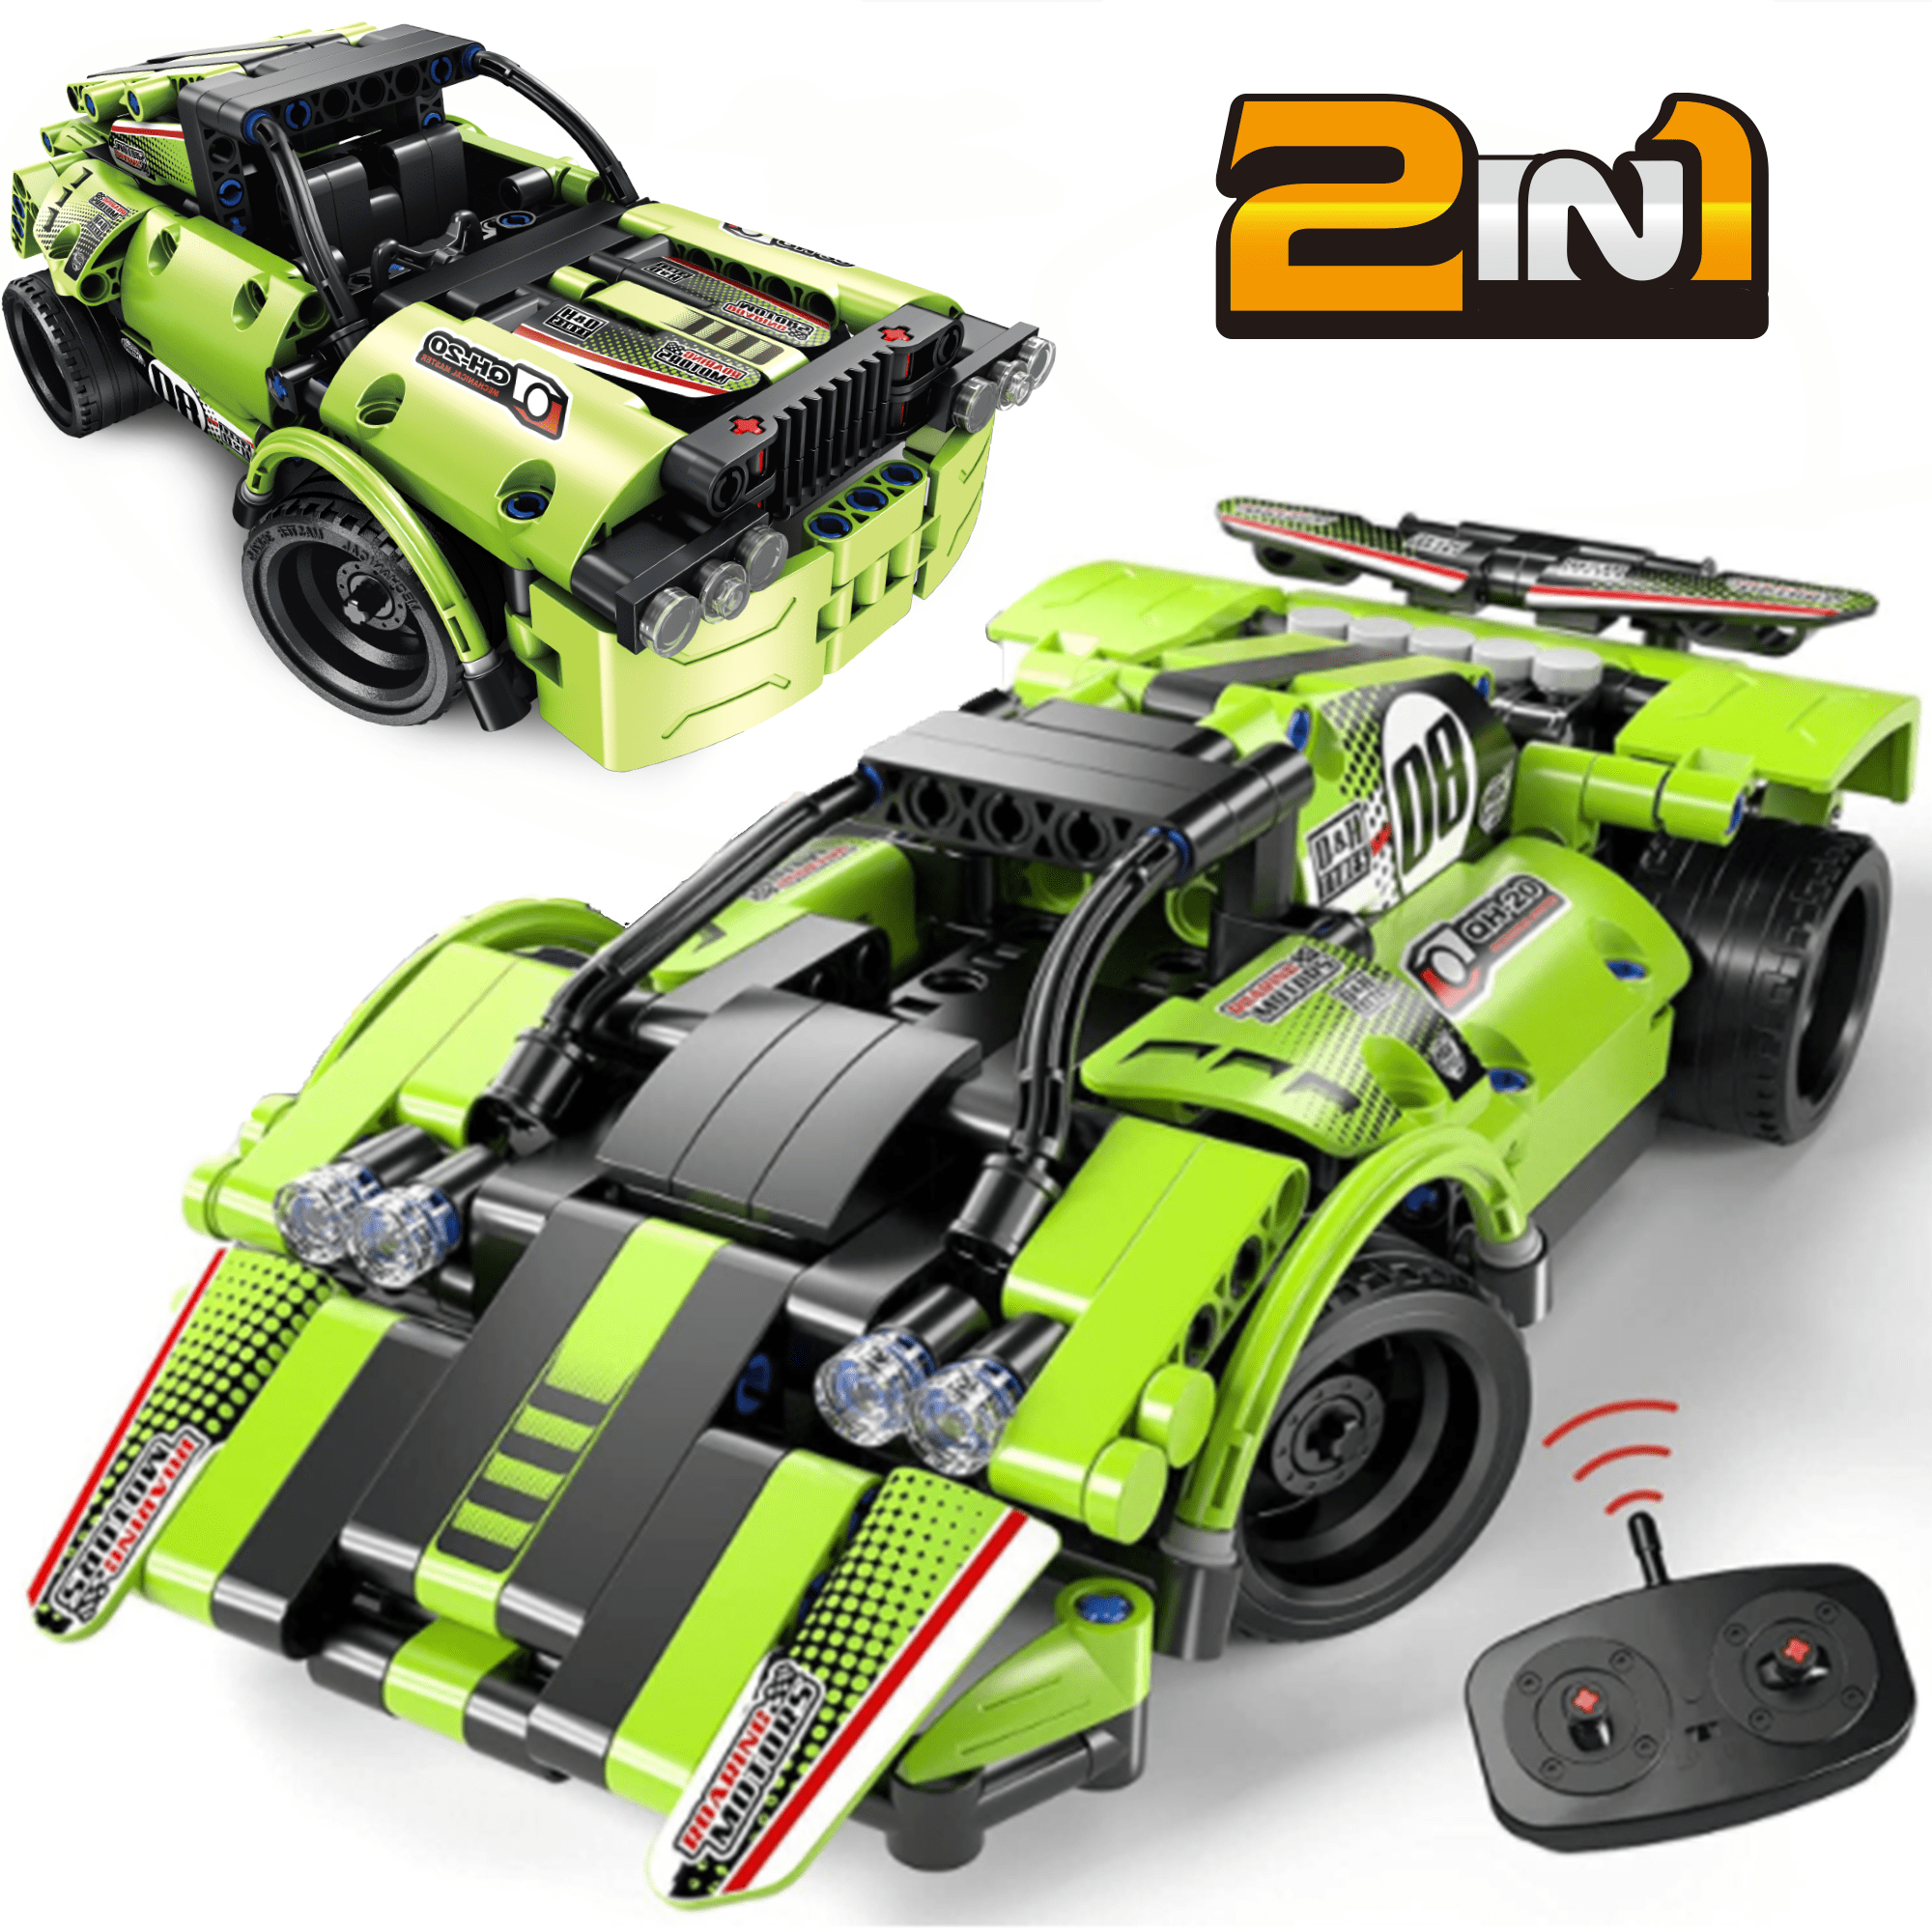 Doloowee Building Kit 392 PCS Model Car Set STEM Project Building Toys Car  for Kids Ages 8-12, Assembly Technique Car Model Kits Birthday Gift for